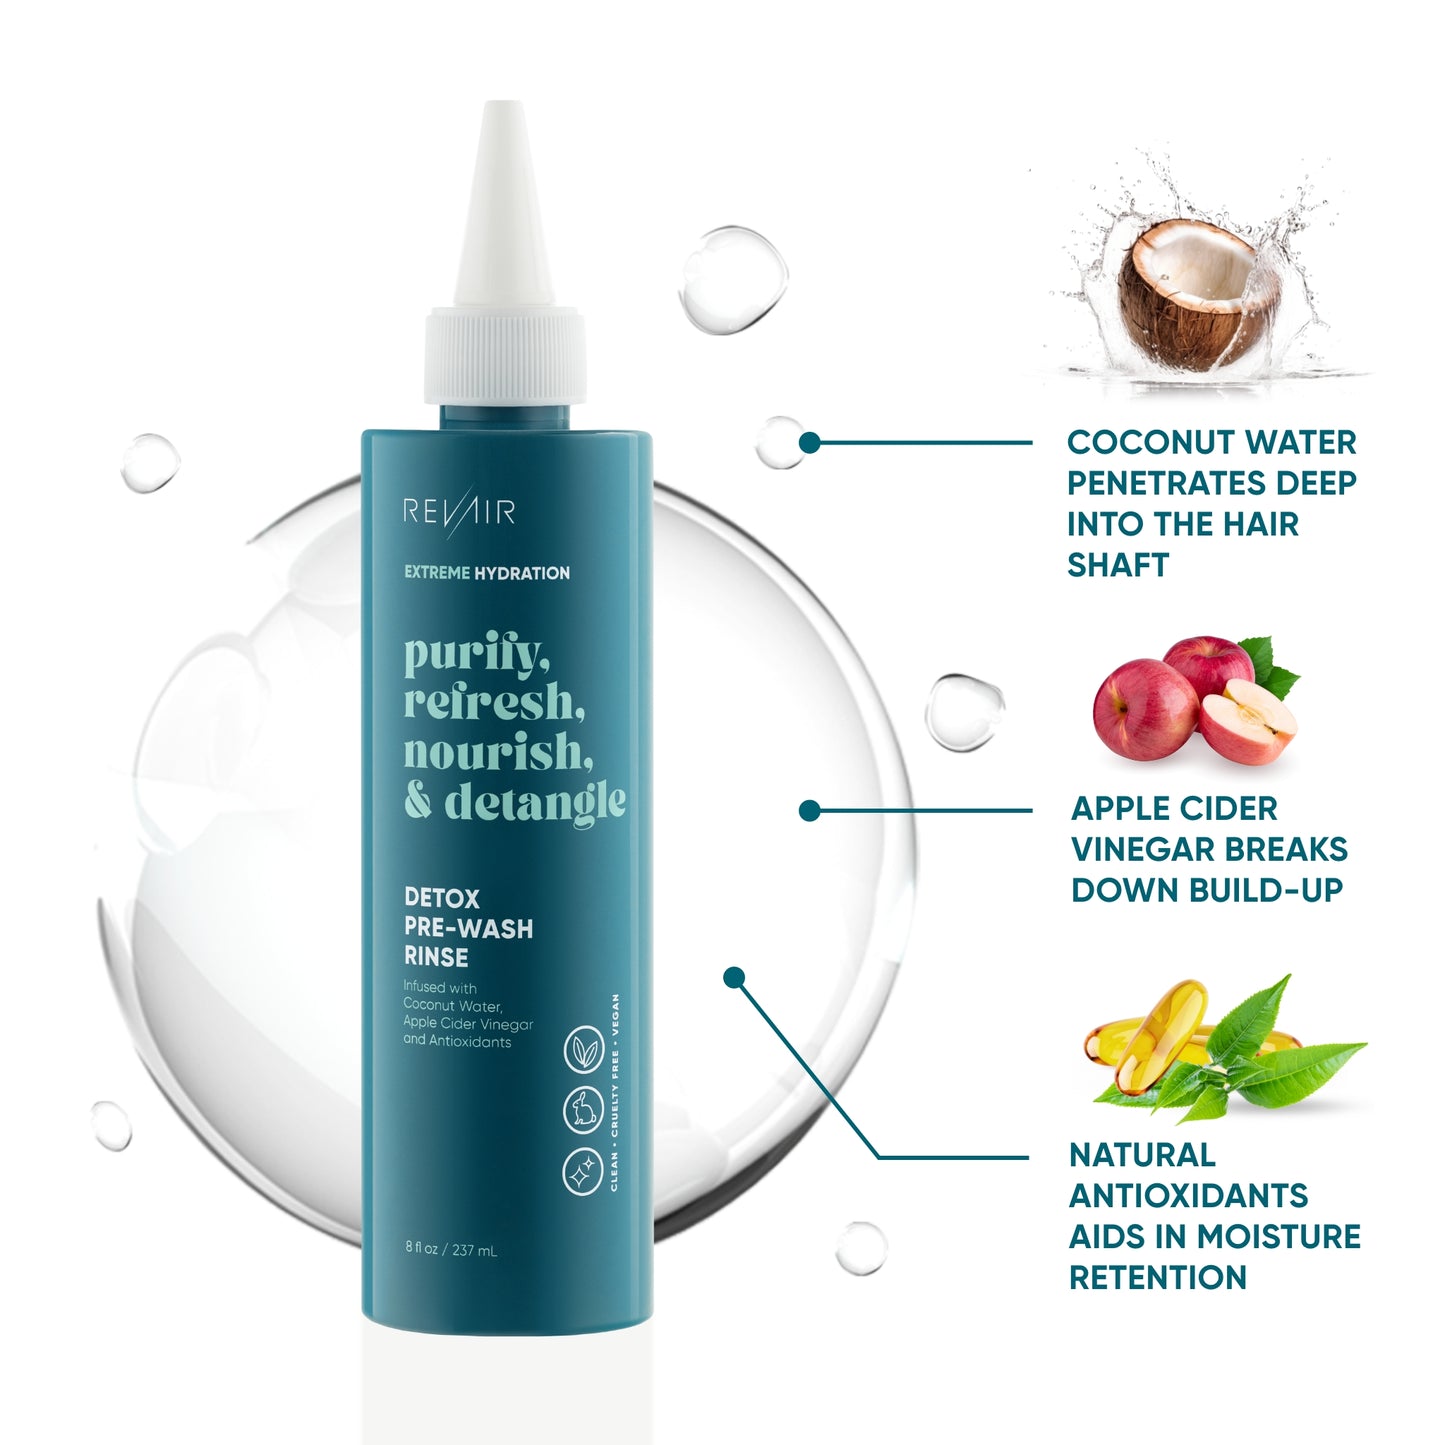 Detox pre-wash rinse - RevAir extreme hydration - purify, refresh, nourish, and detangle - coconut water penetrates deep into the hair shaft, apple cider vinegar breaks down build-up, and natural antioxidants aid in moisture retention